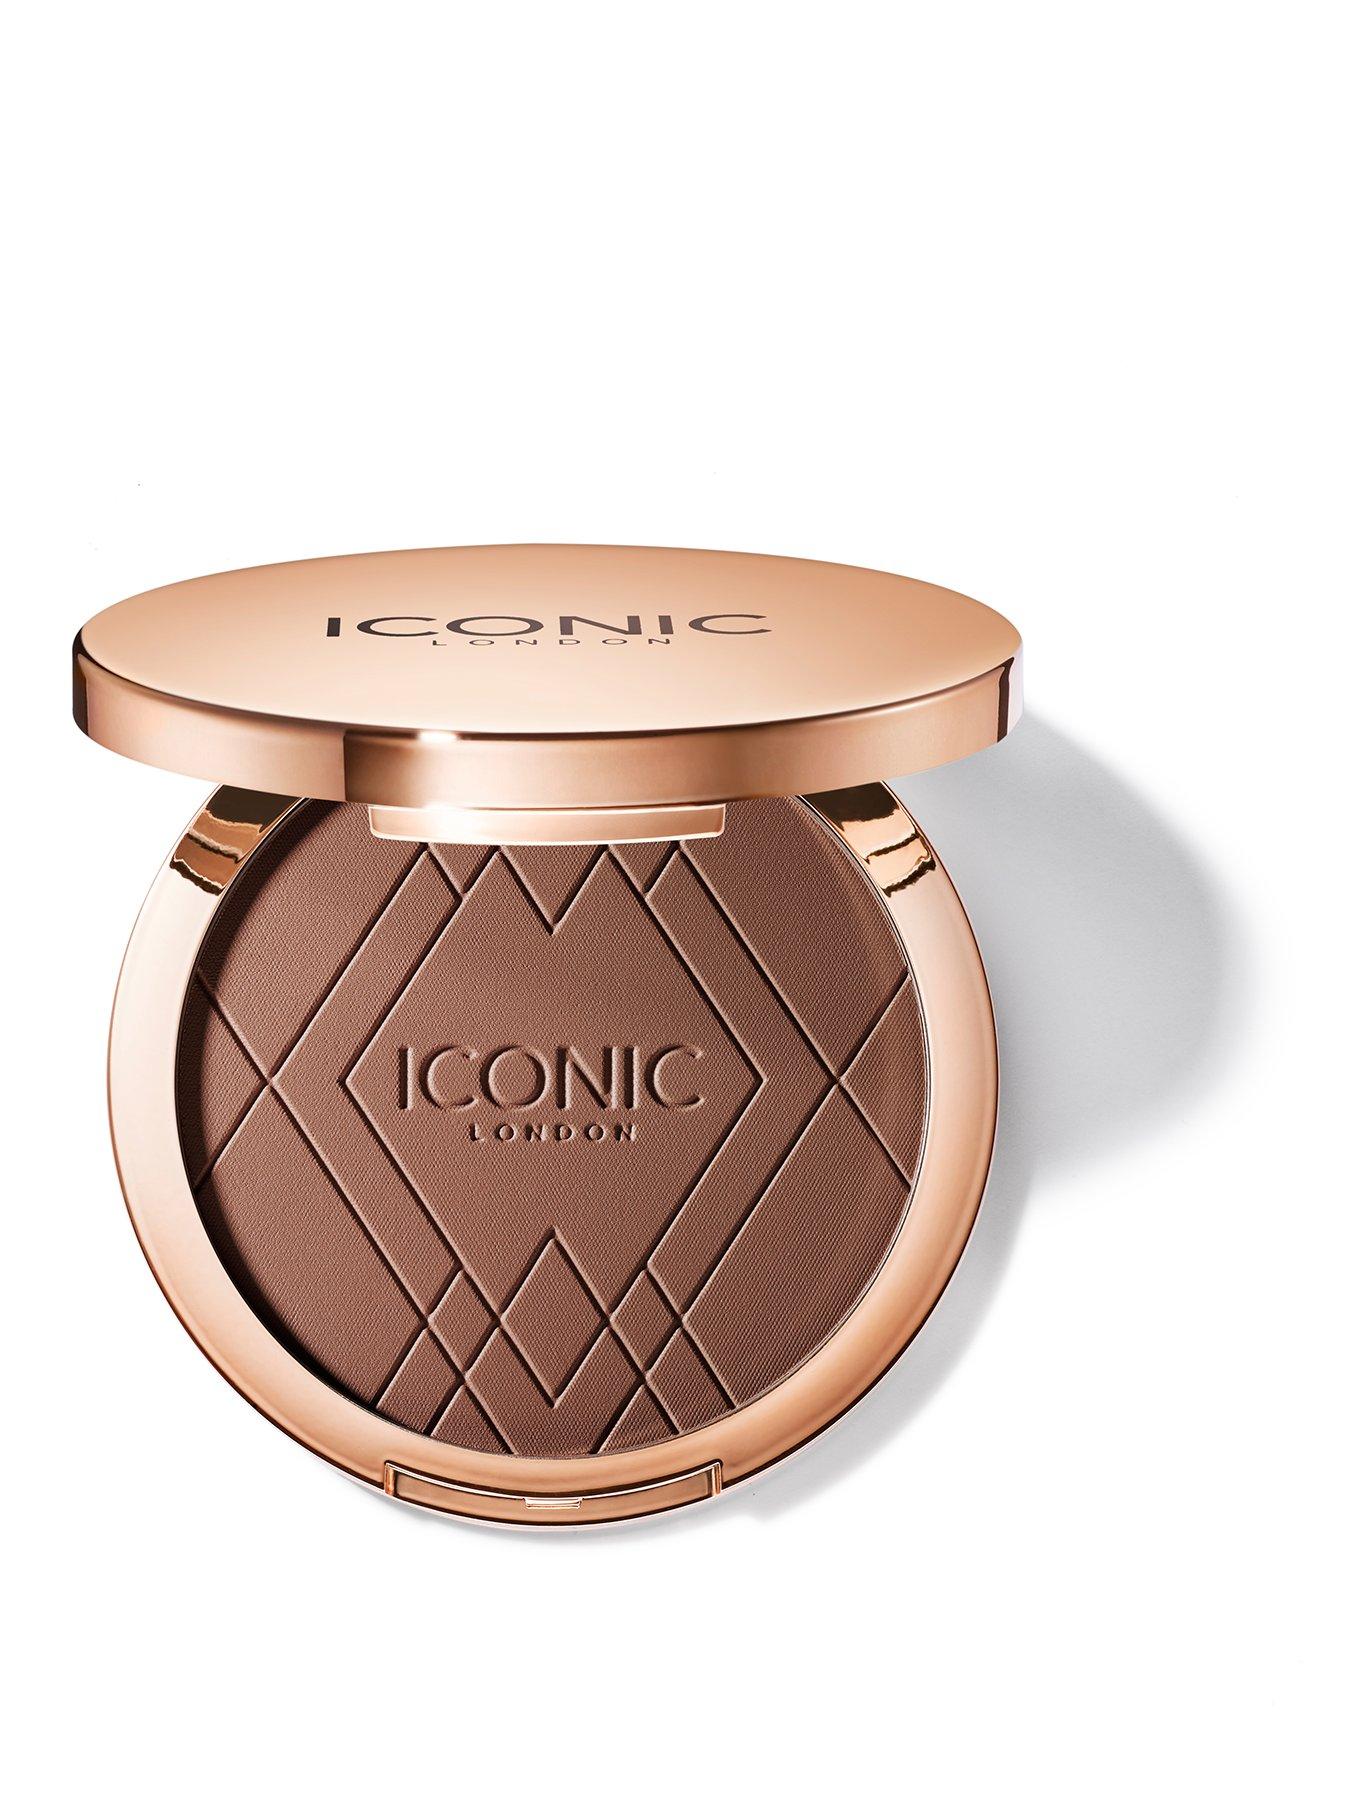 Iconic London Kissed by the Sun Multi-Use Play Time Blush & Bronzer (0.17  oz)